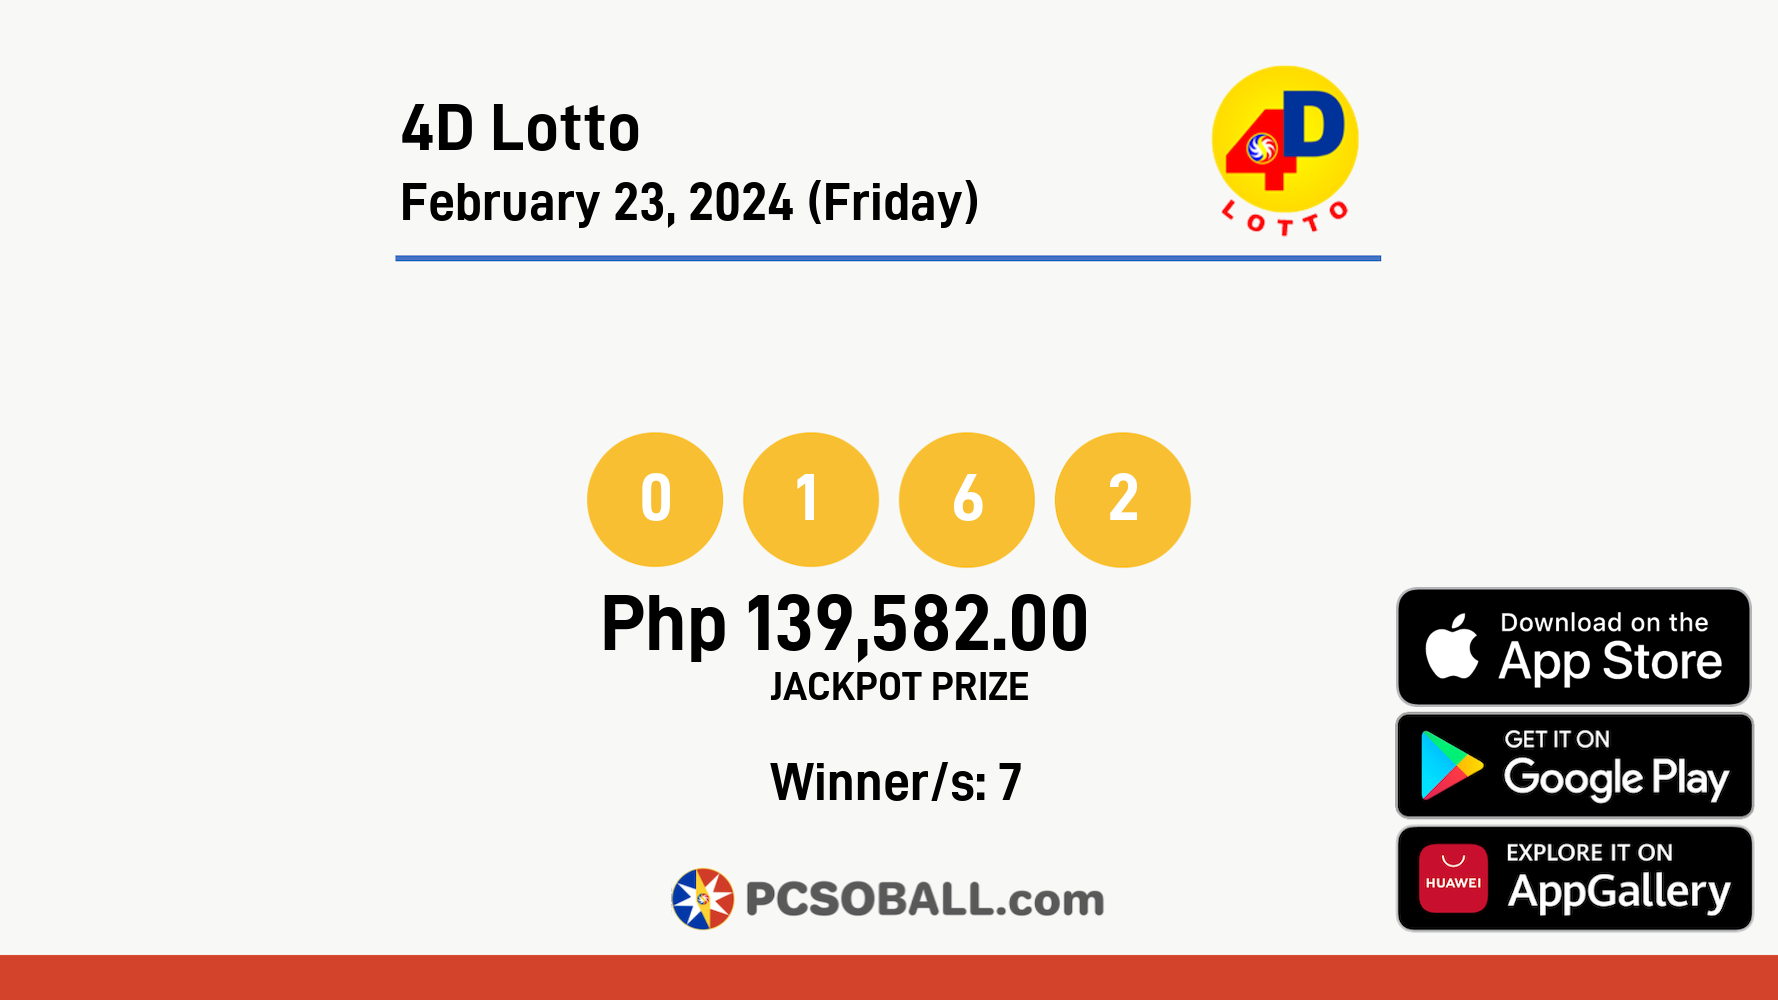 4D Lotto February 23, 2024 (Friday) Result